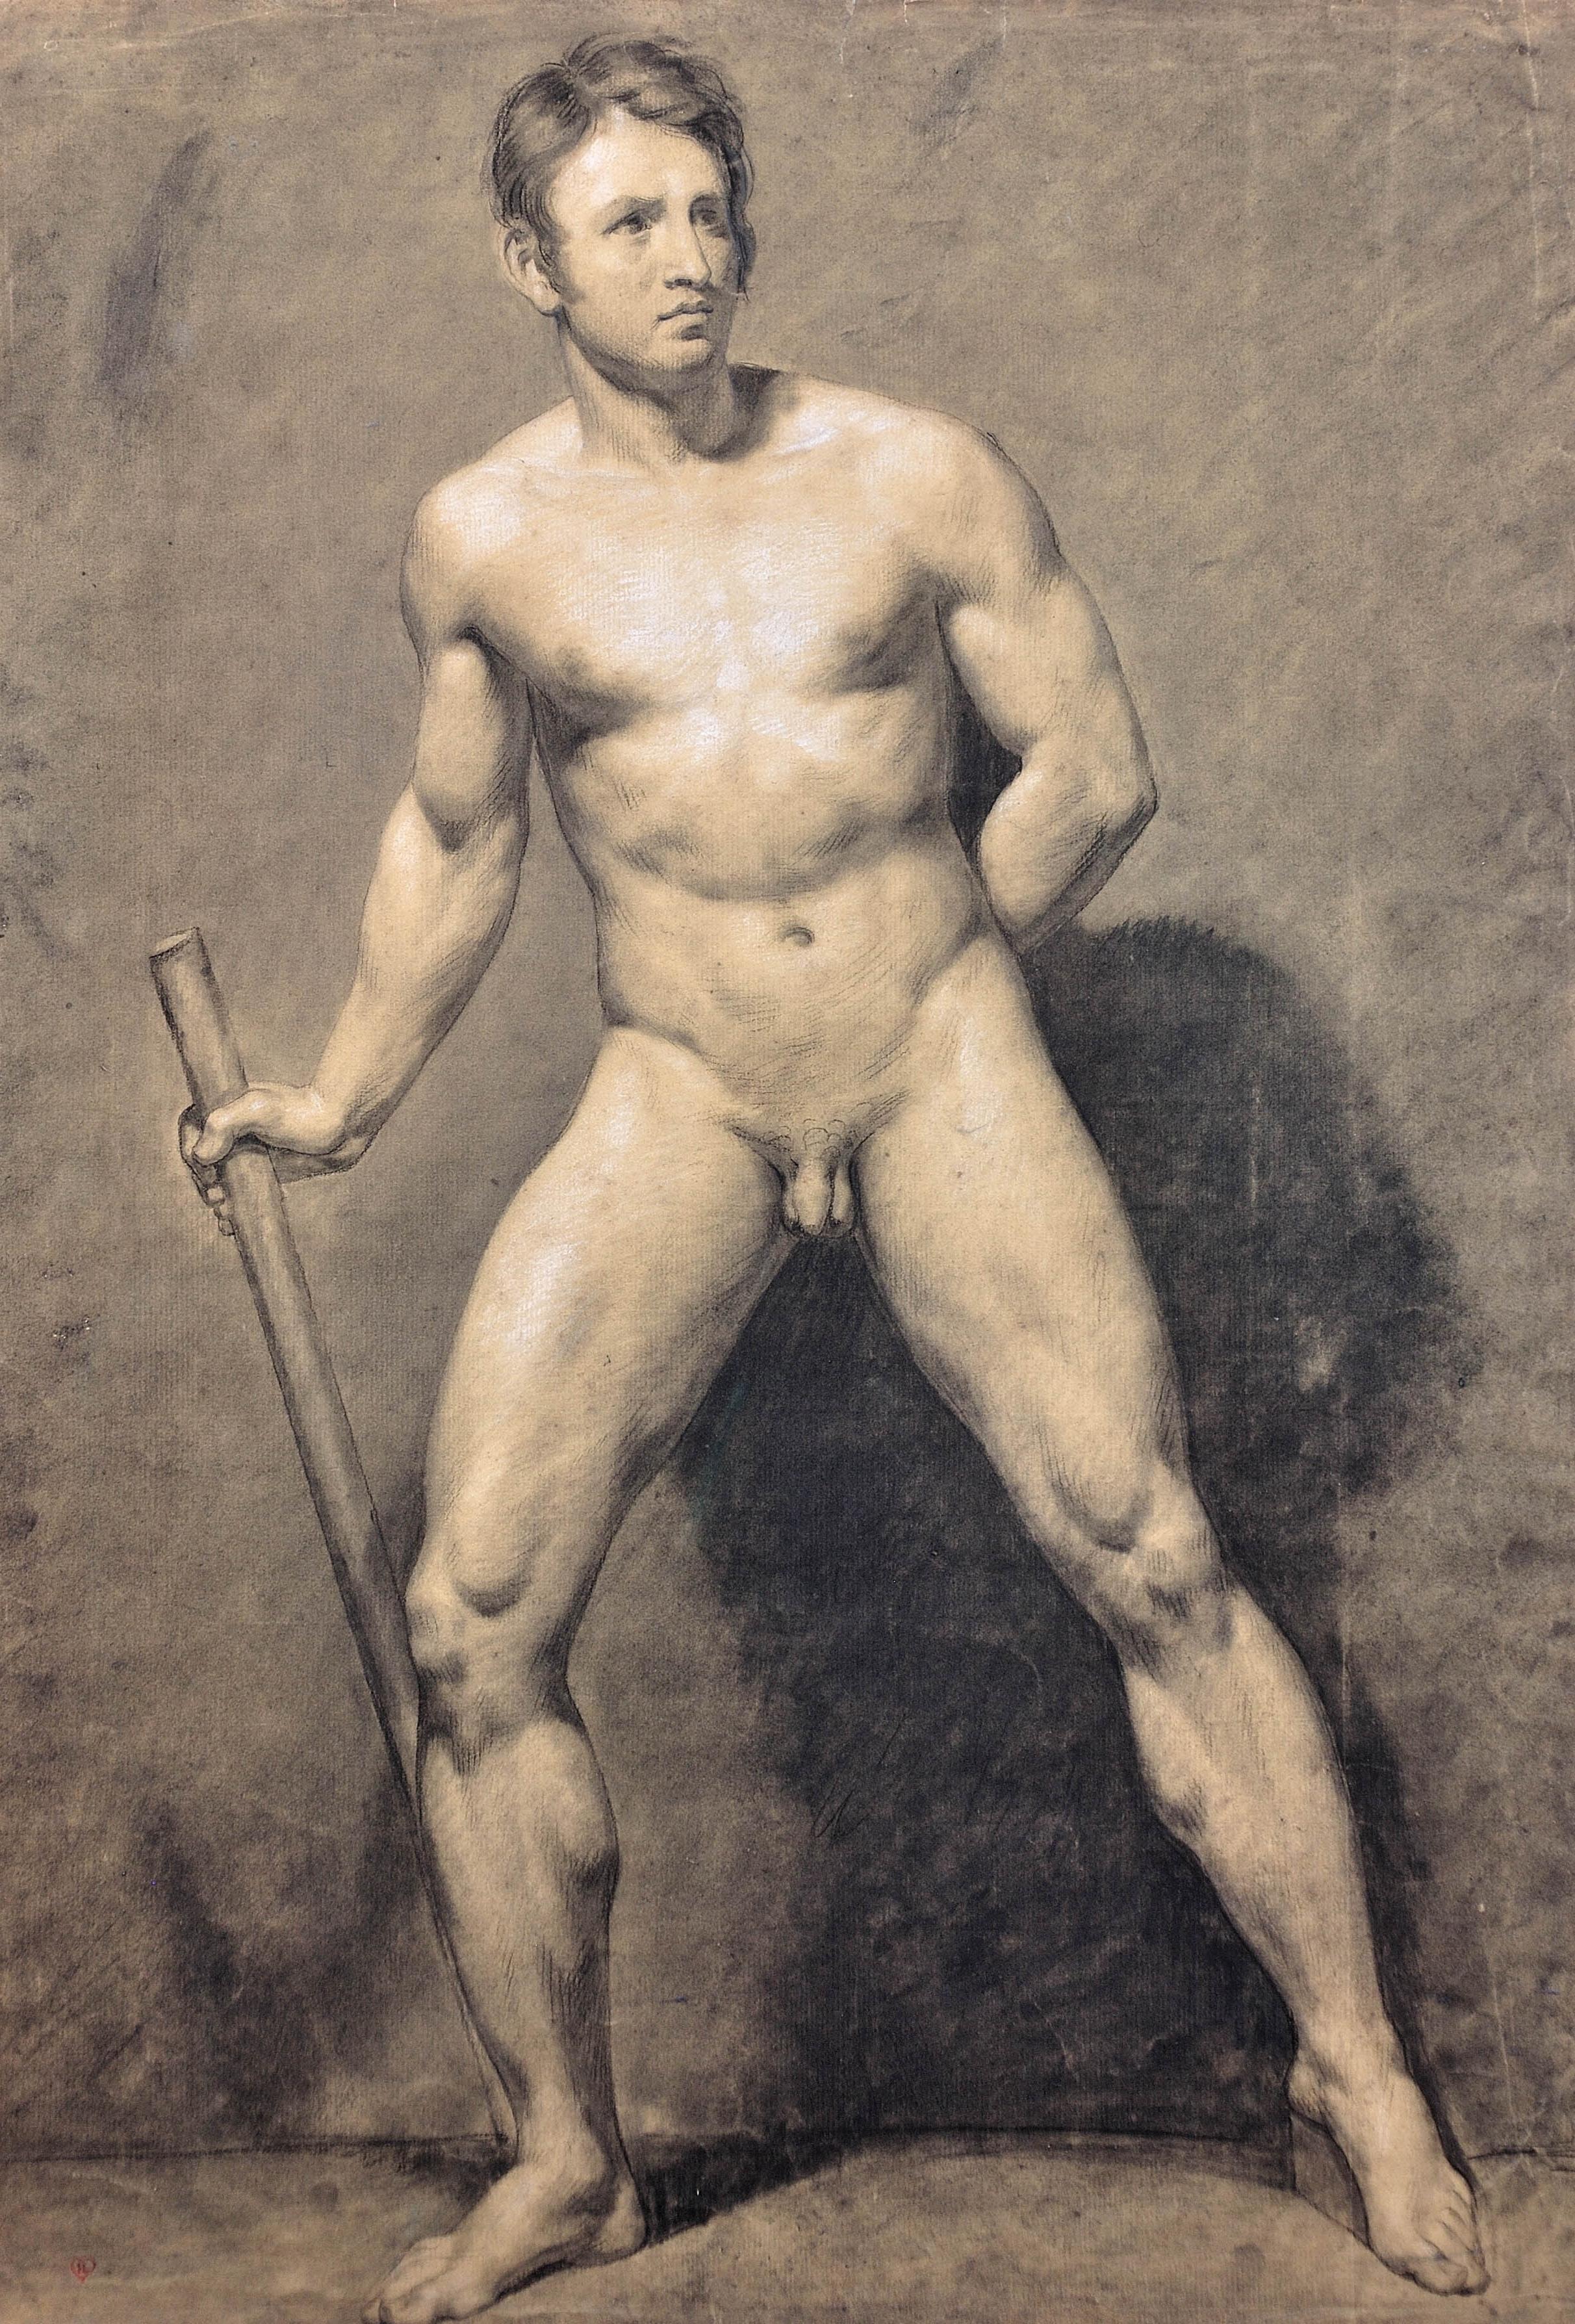 Eduard Braun.
German ( b.1798 - d.1876 ).
Academic Life Study of a Male Nude Carrying a Staff
Pencil and Charcoal on Paper with Heightening on paper.
Annotation (presumably a dedication) lower left.
Paper size 24 inches x 16.5 inches ( 61cm x 42cm